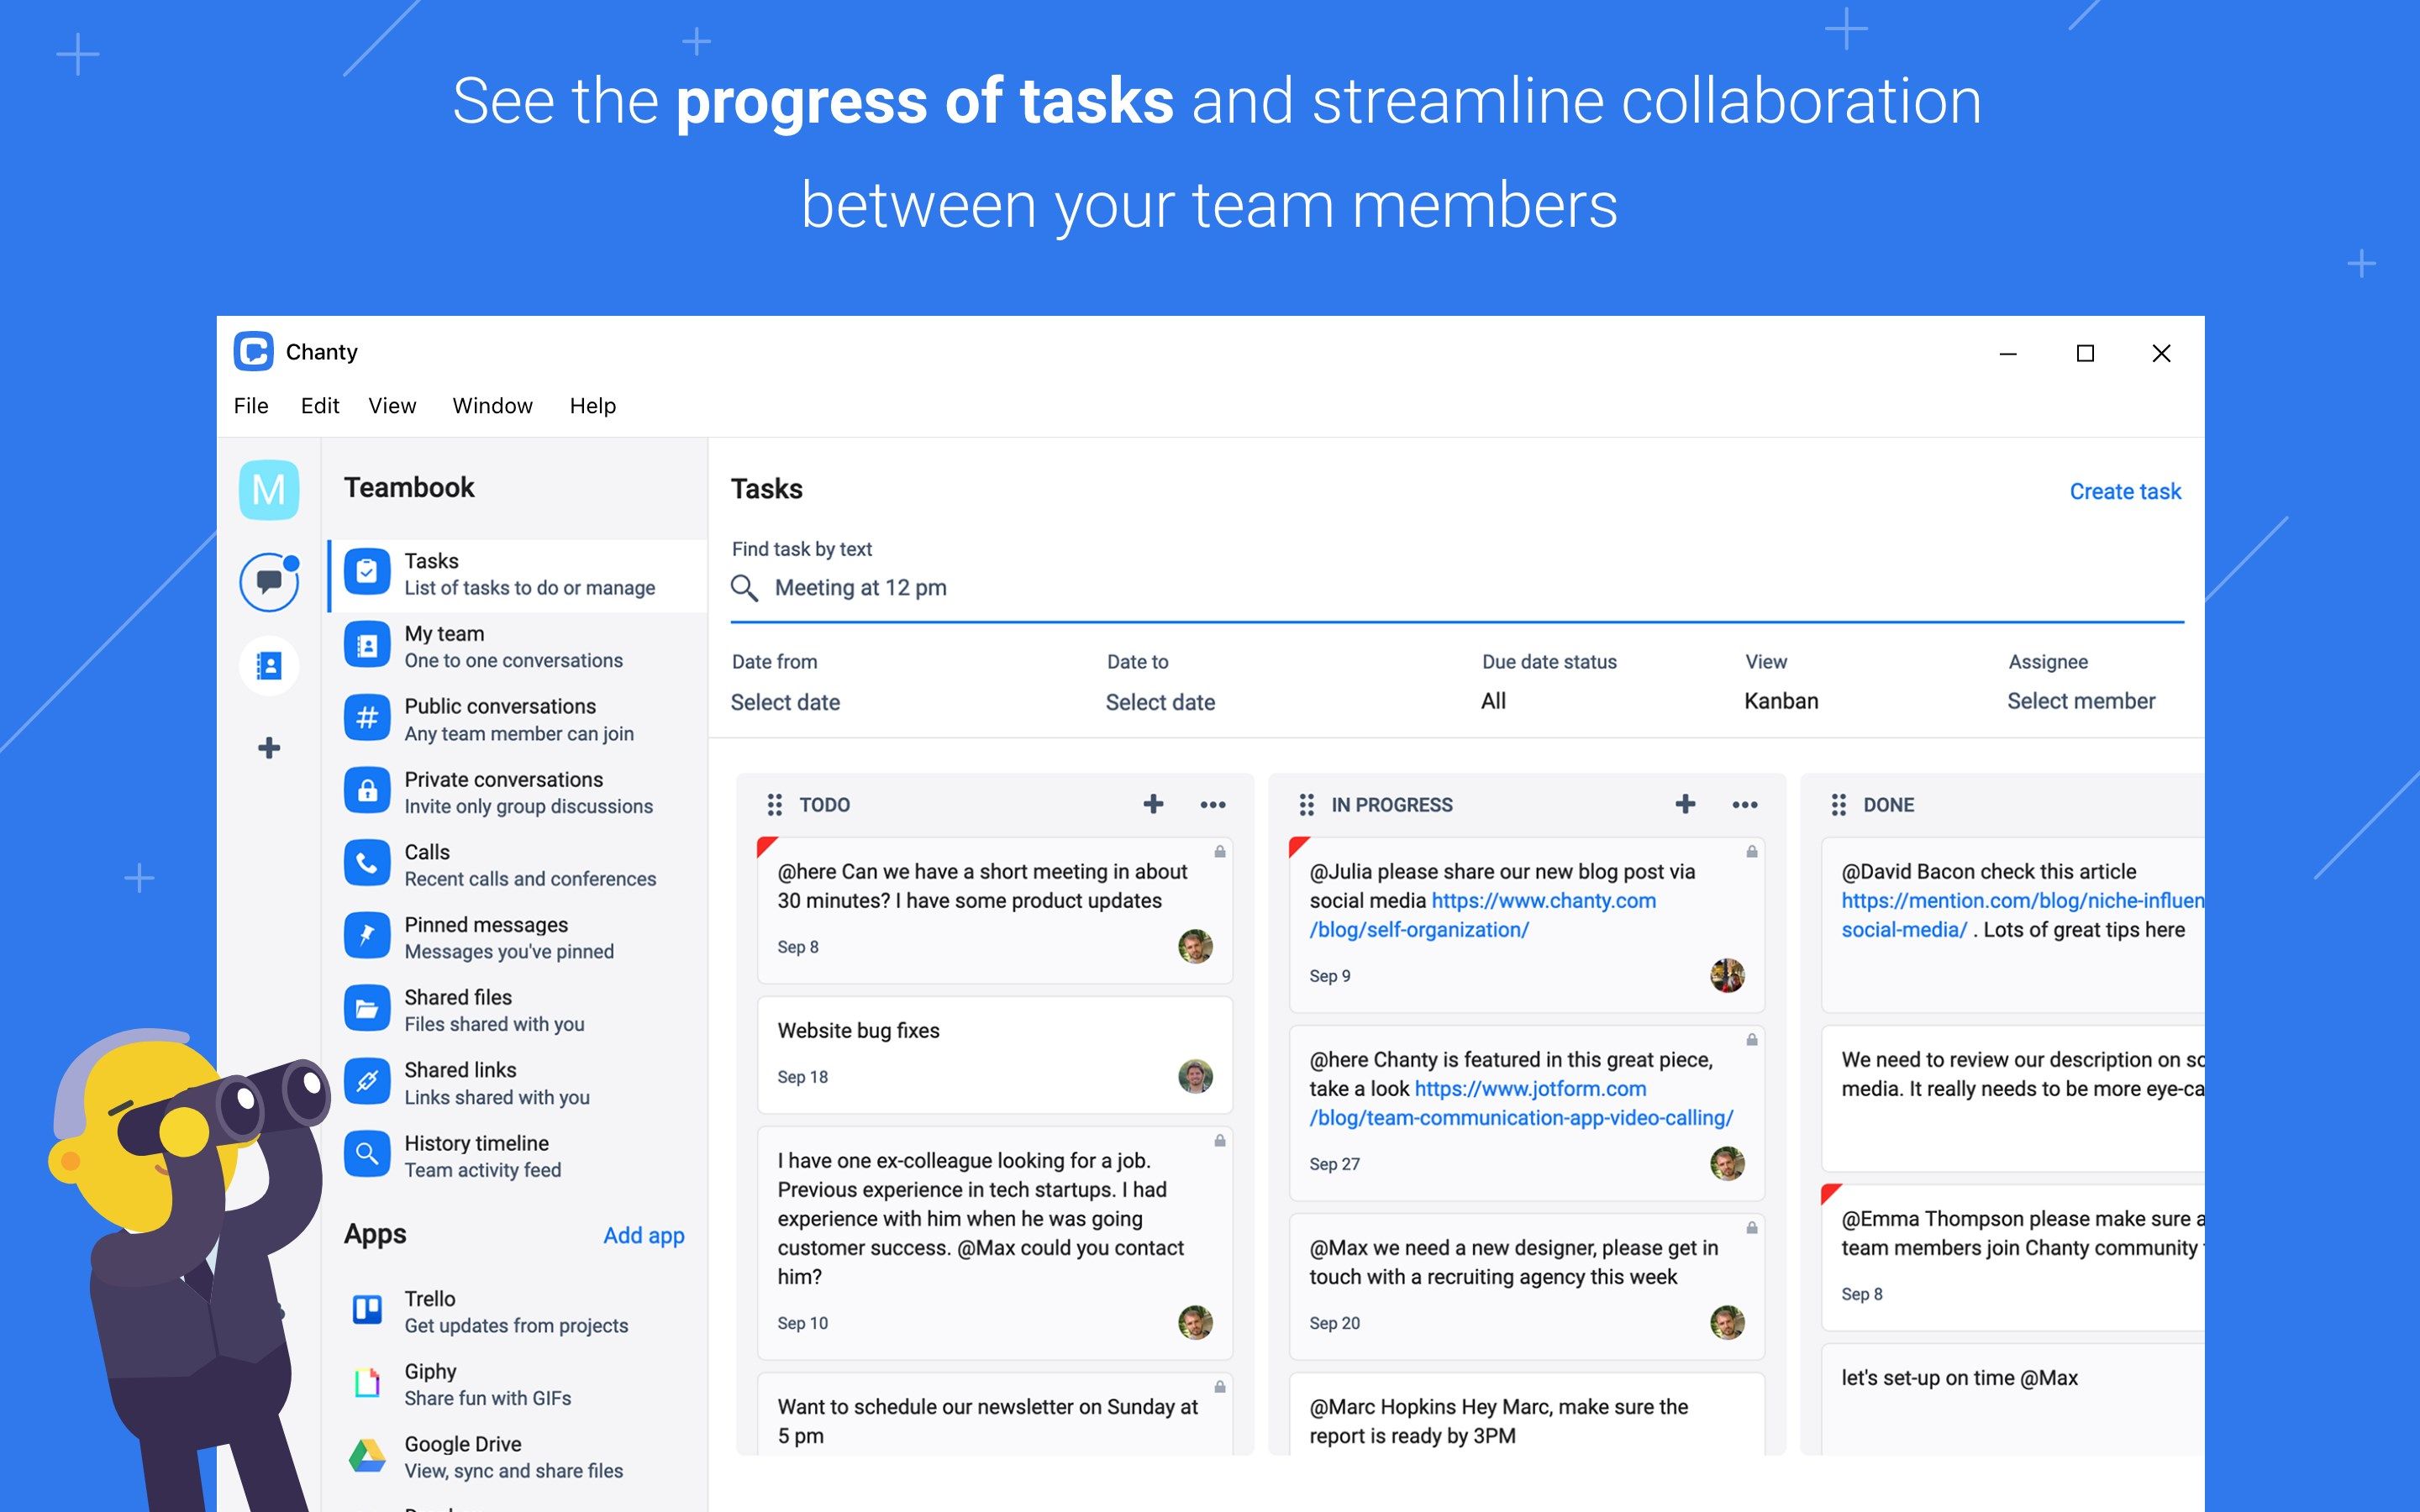 See the progress of tasks and streamline collaboration between your team members